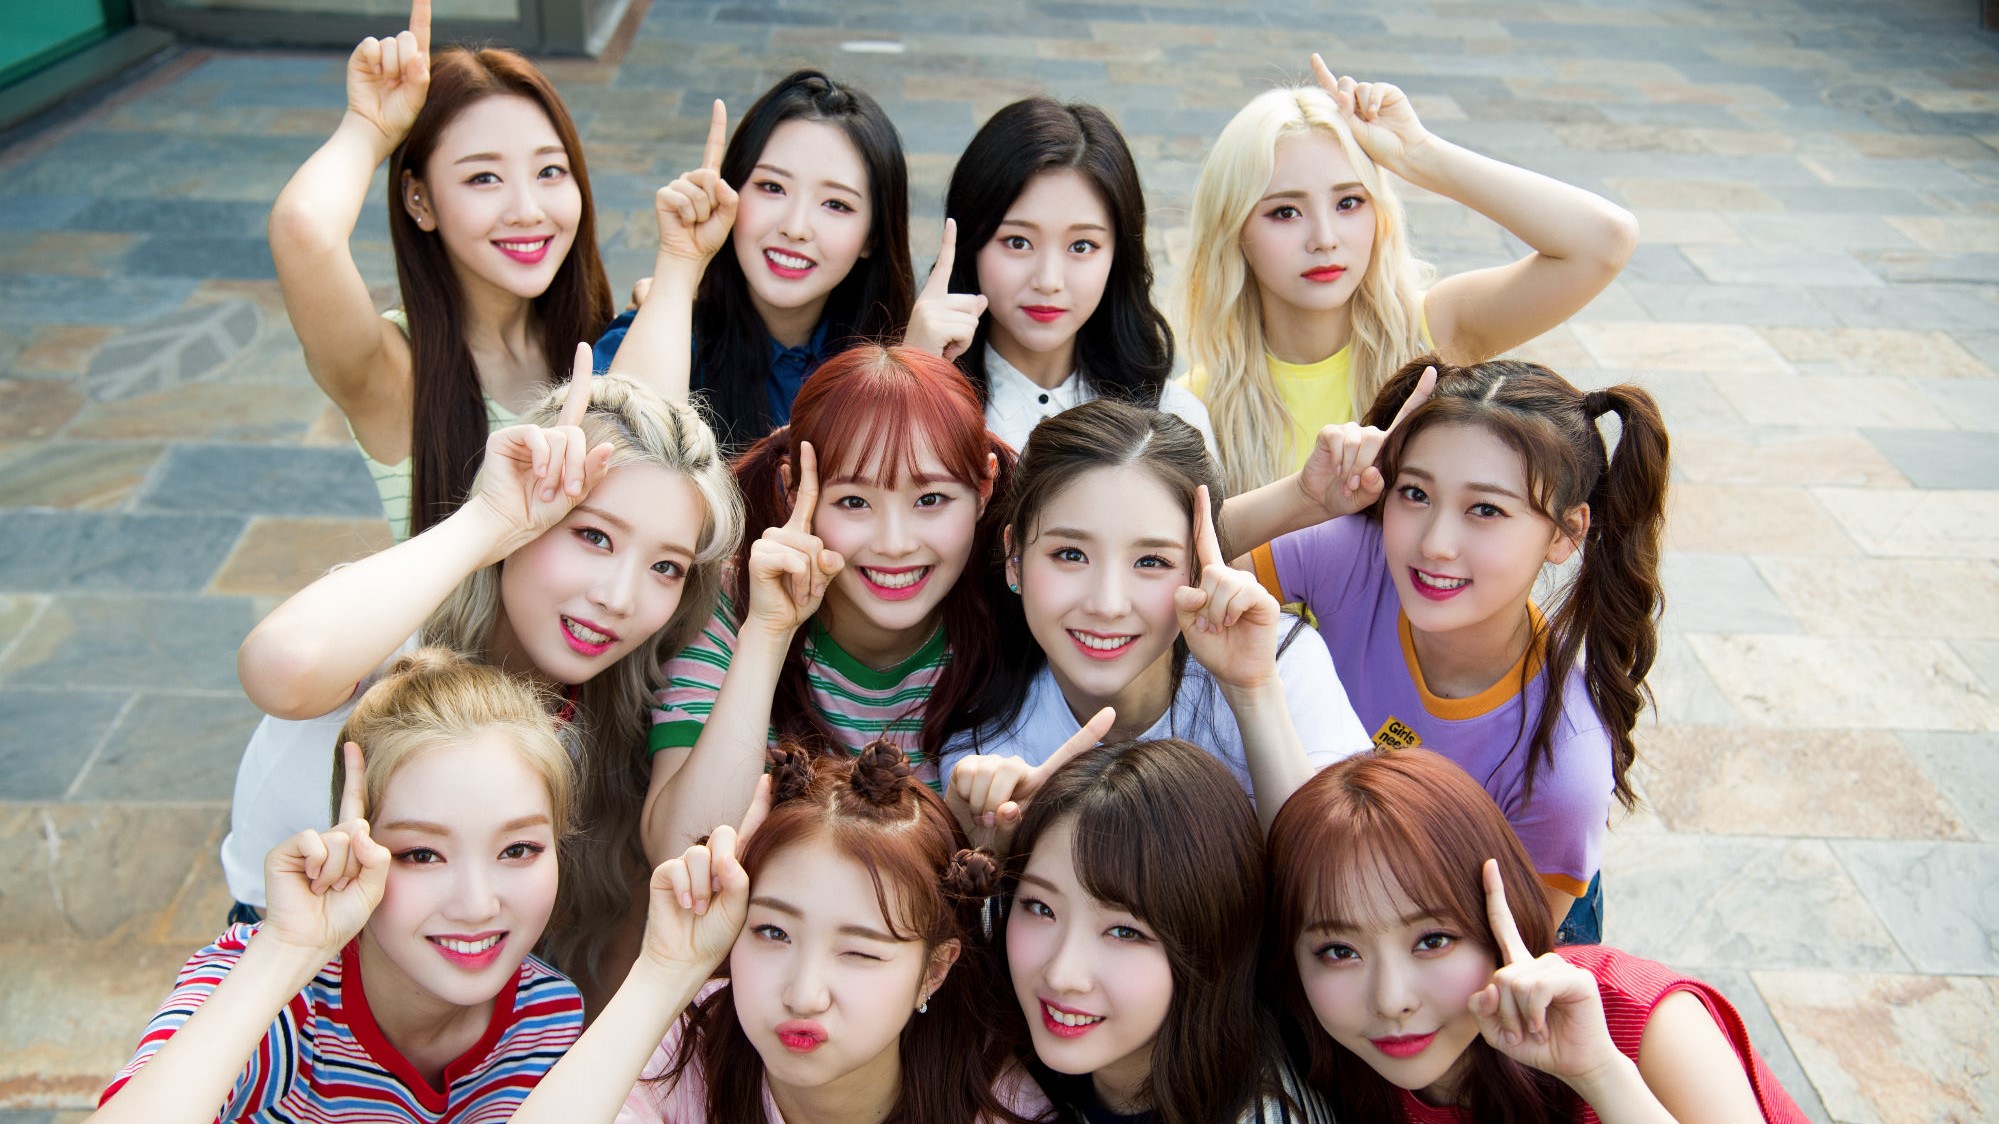 Loona Game V2 - Unity Play.